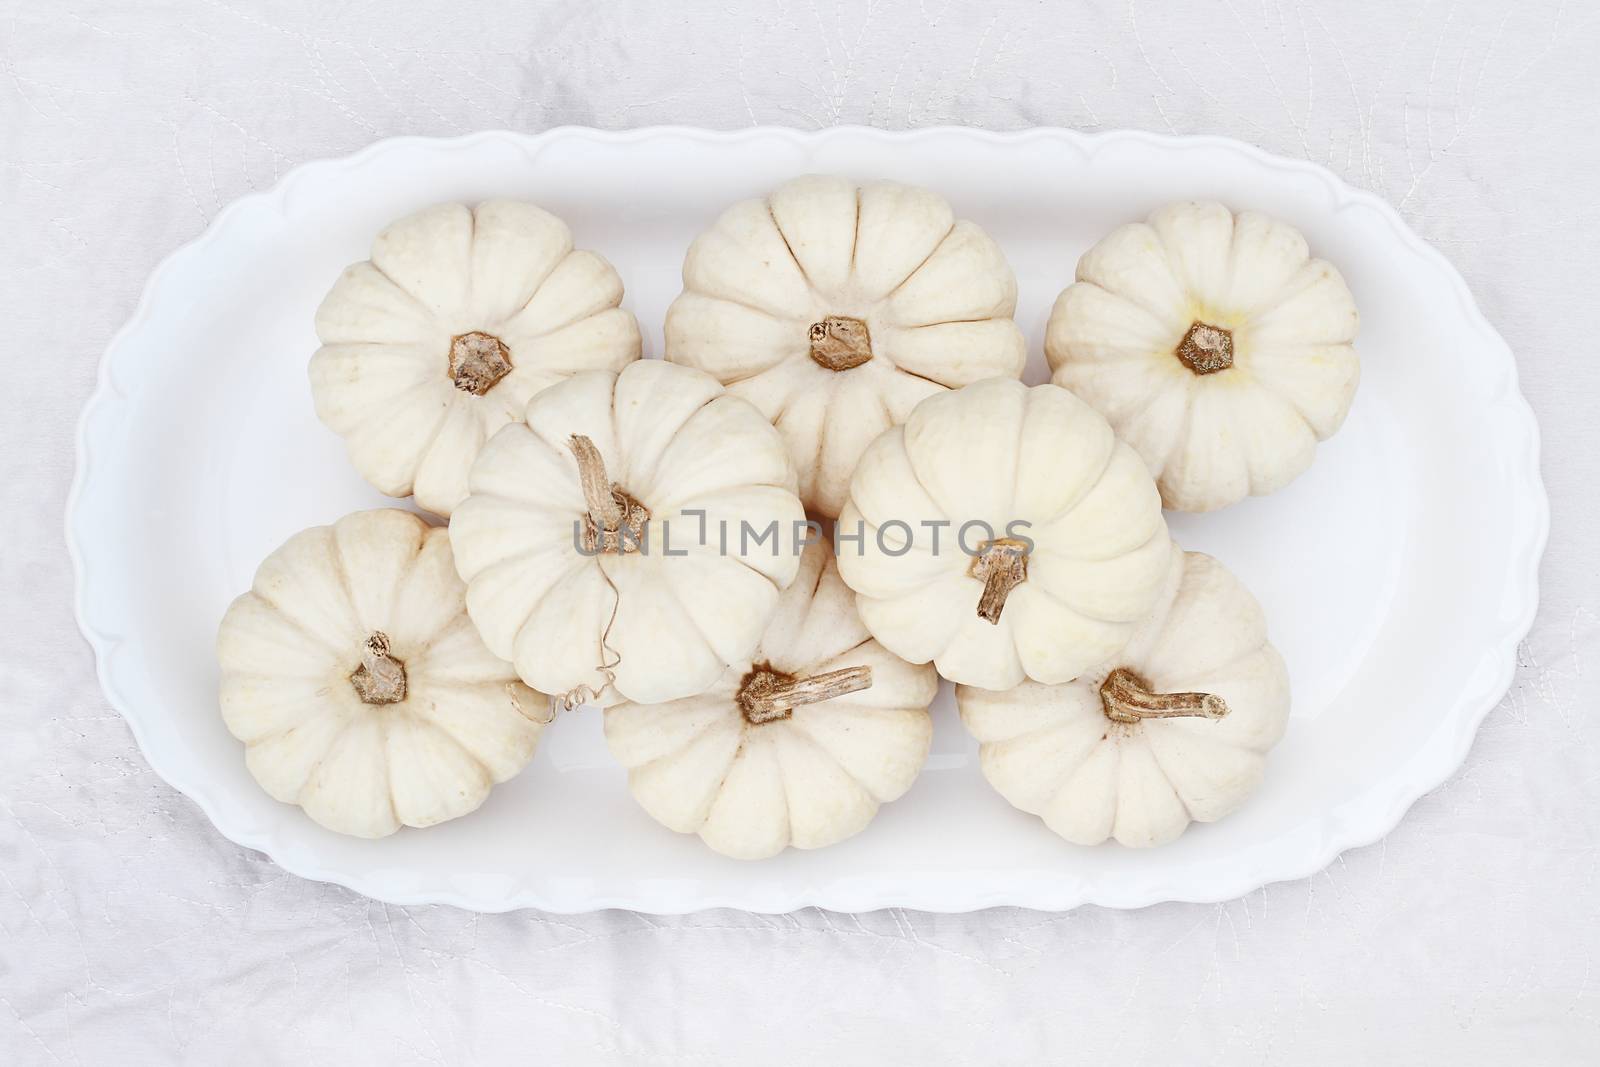 Beautiful table decorations of white pumpkins.